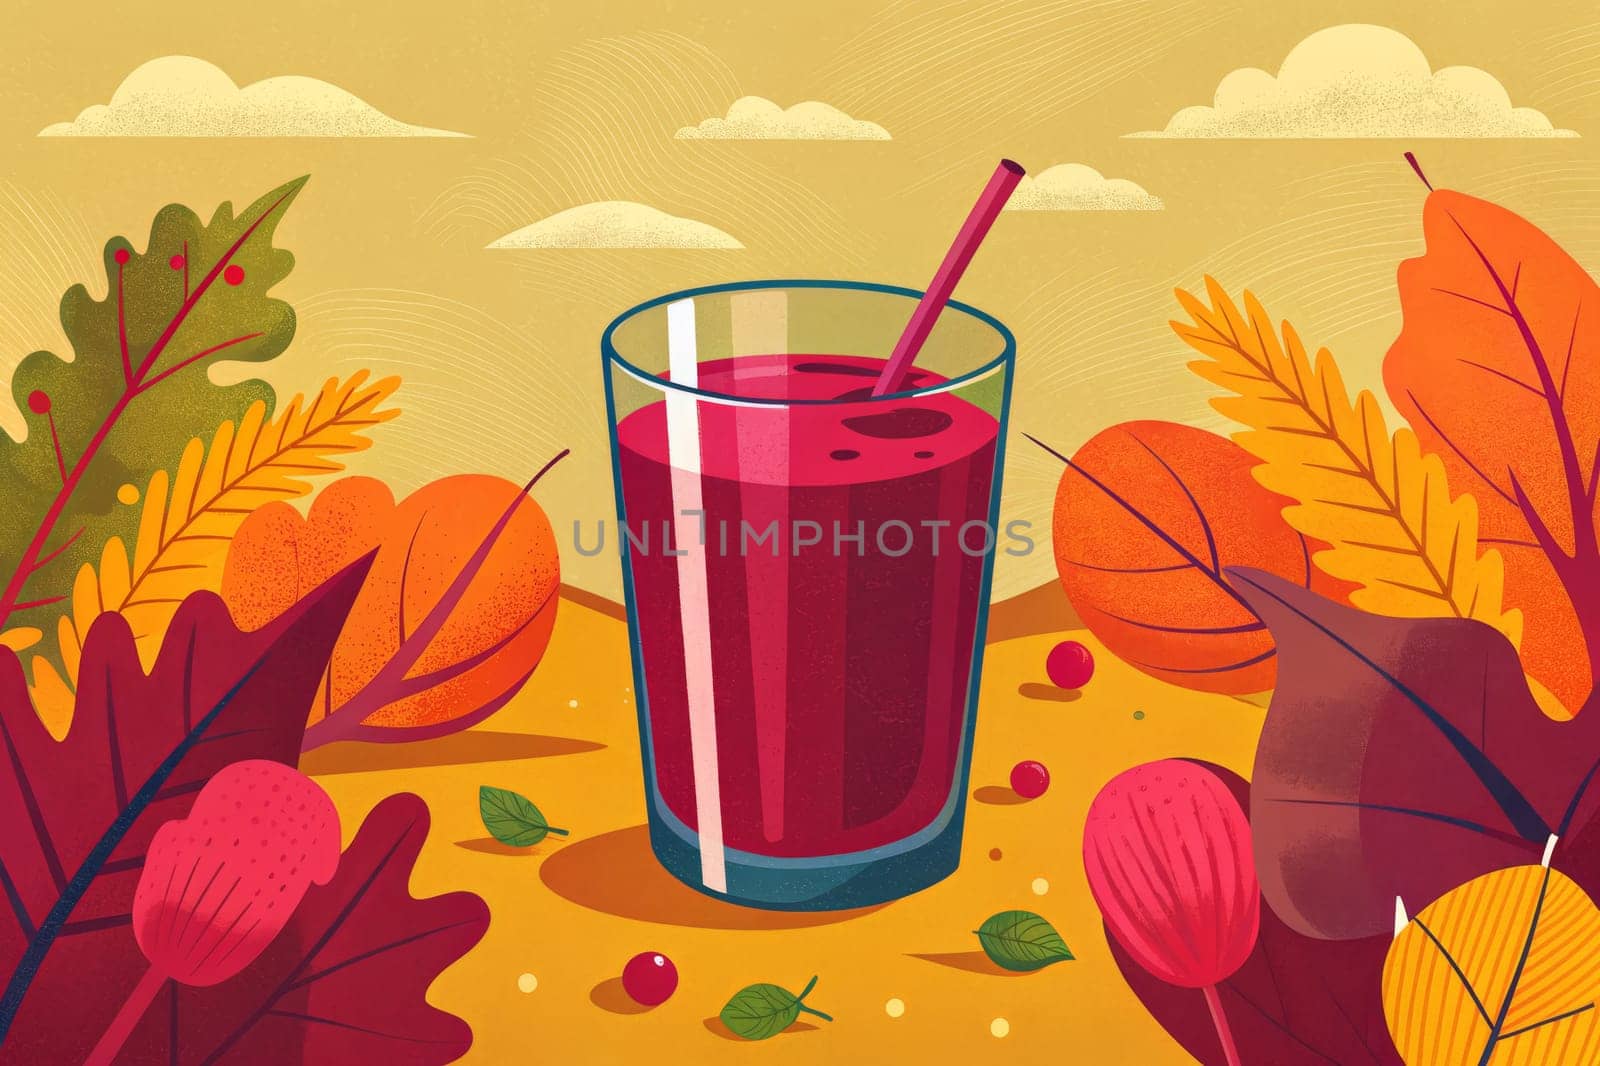 A glass of ruby red juice sits on a table surrounded by vibrant fall foliage, evoking the warm and cozy atmosphere of the season. The leaves in shades of red, yellow, and orange create a beautiful backdrop for the refreshing drink, suggesting a moment of peace and tranquility.